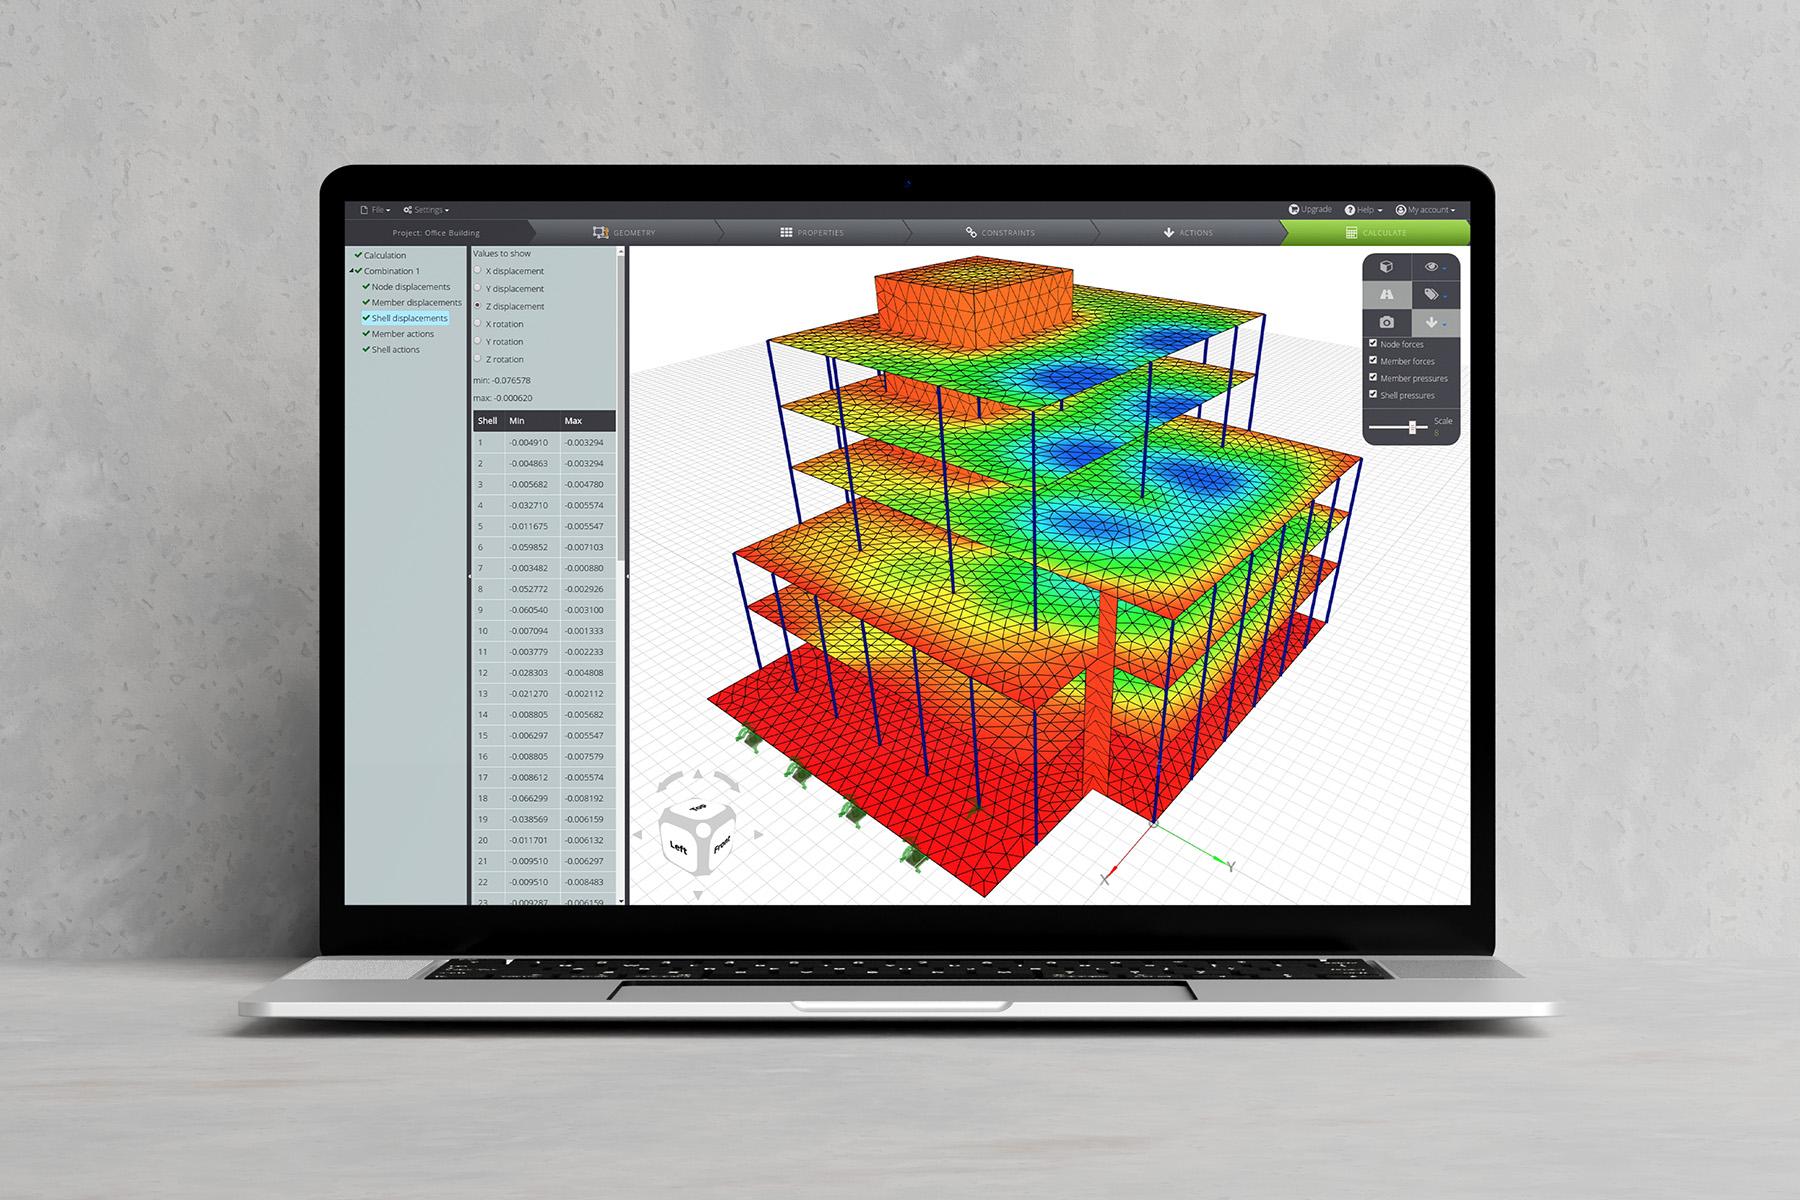 What makes WeStatiX structural analysis different?